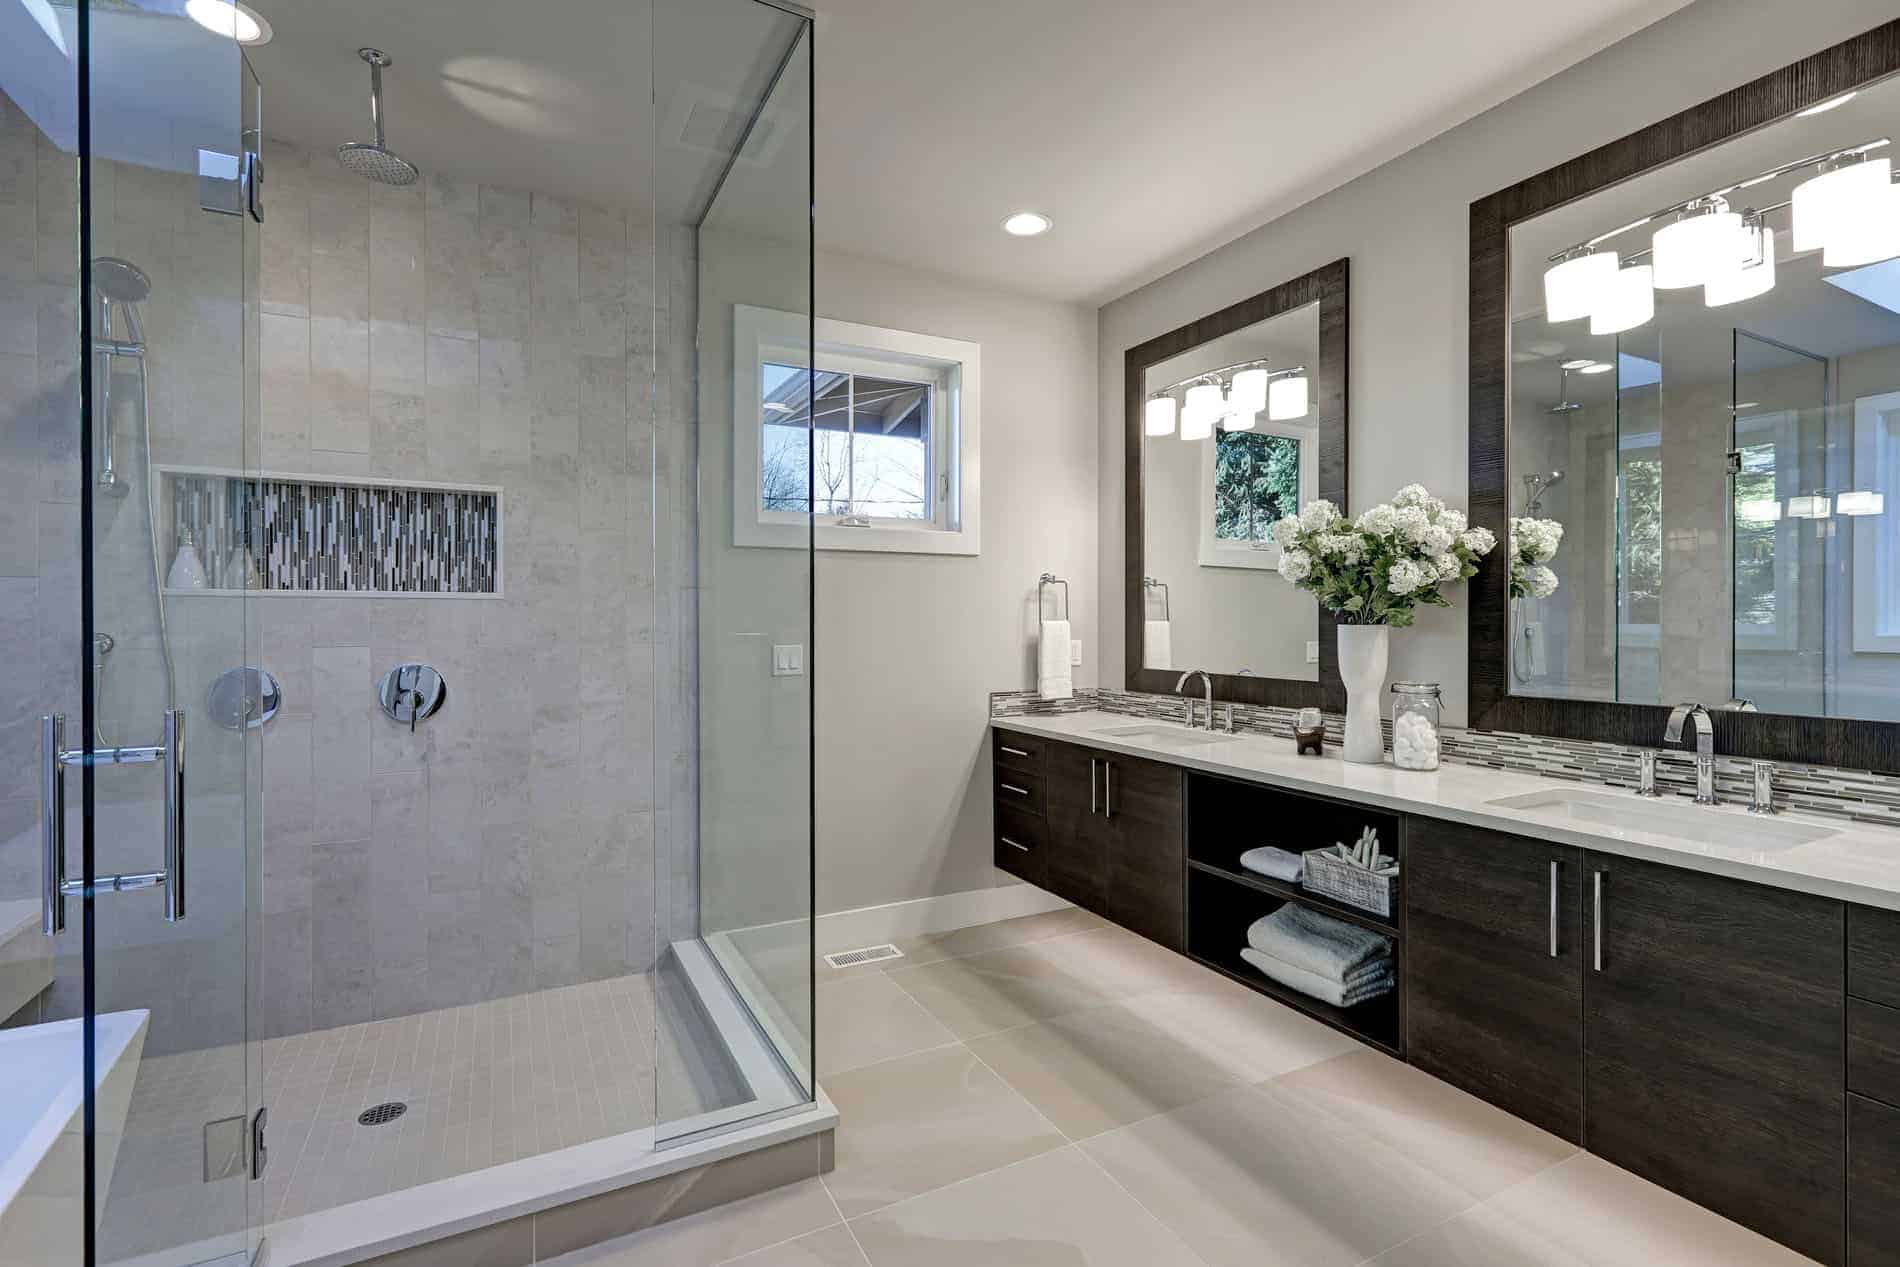 How to clean glass shower doors for a bathroom